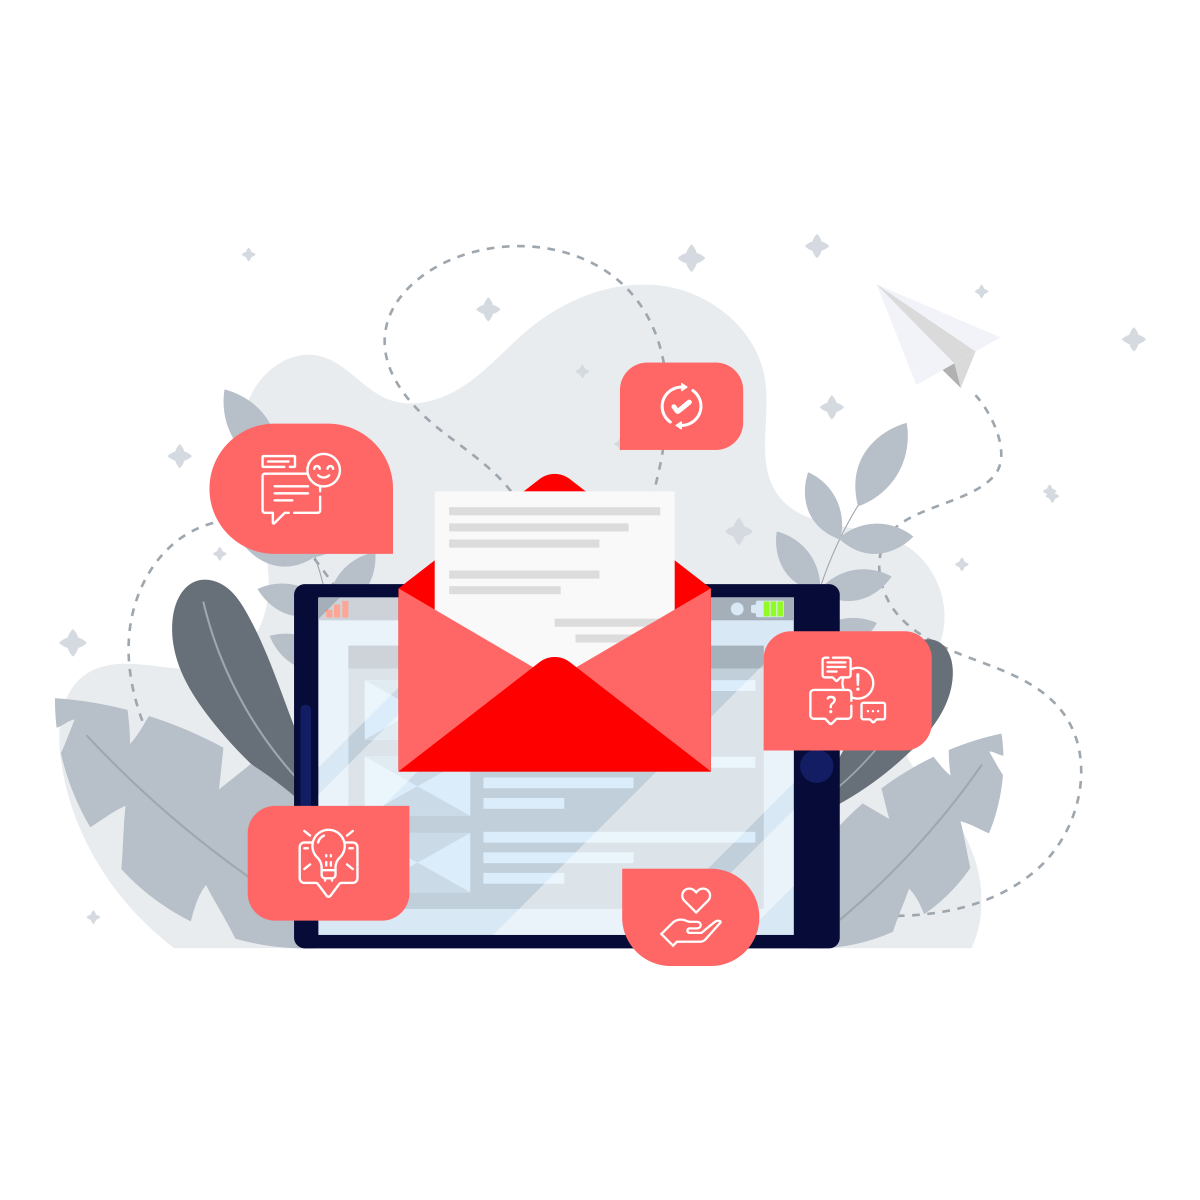 5 Types of Messages to Send to Customers during COVID-19